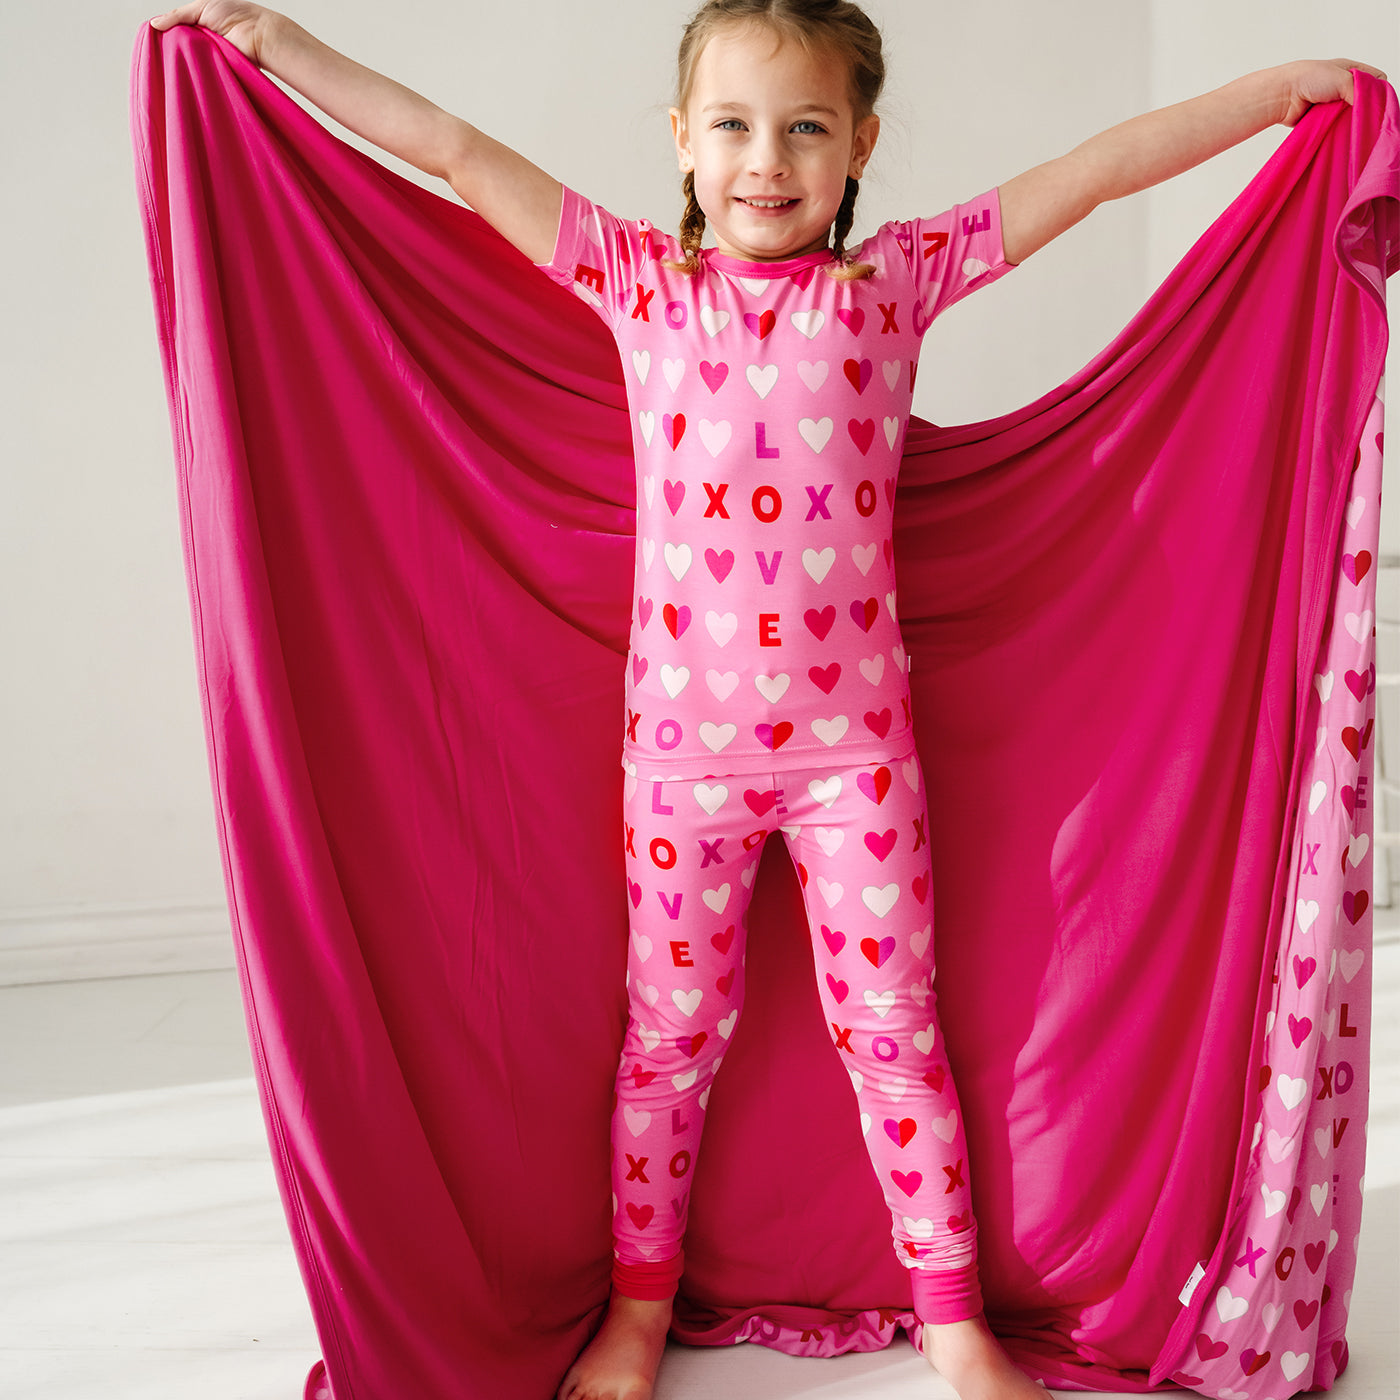 child posing wearing a Pink XOXO two piece pajama set holding up a matching large cloud blanket showing off the solid pink backing